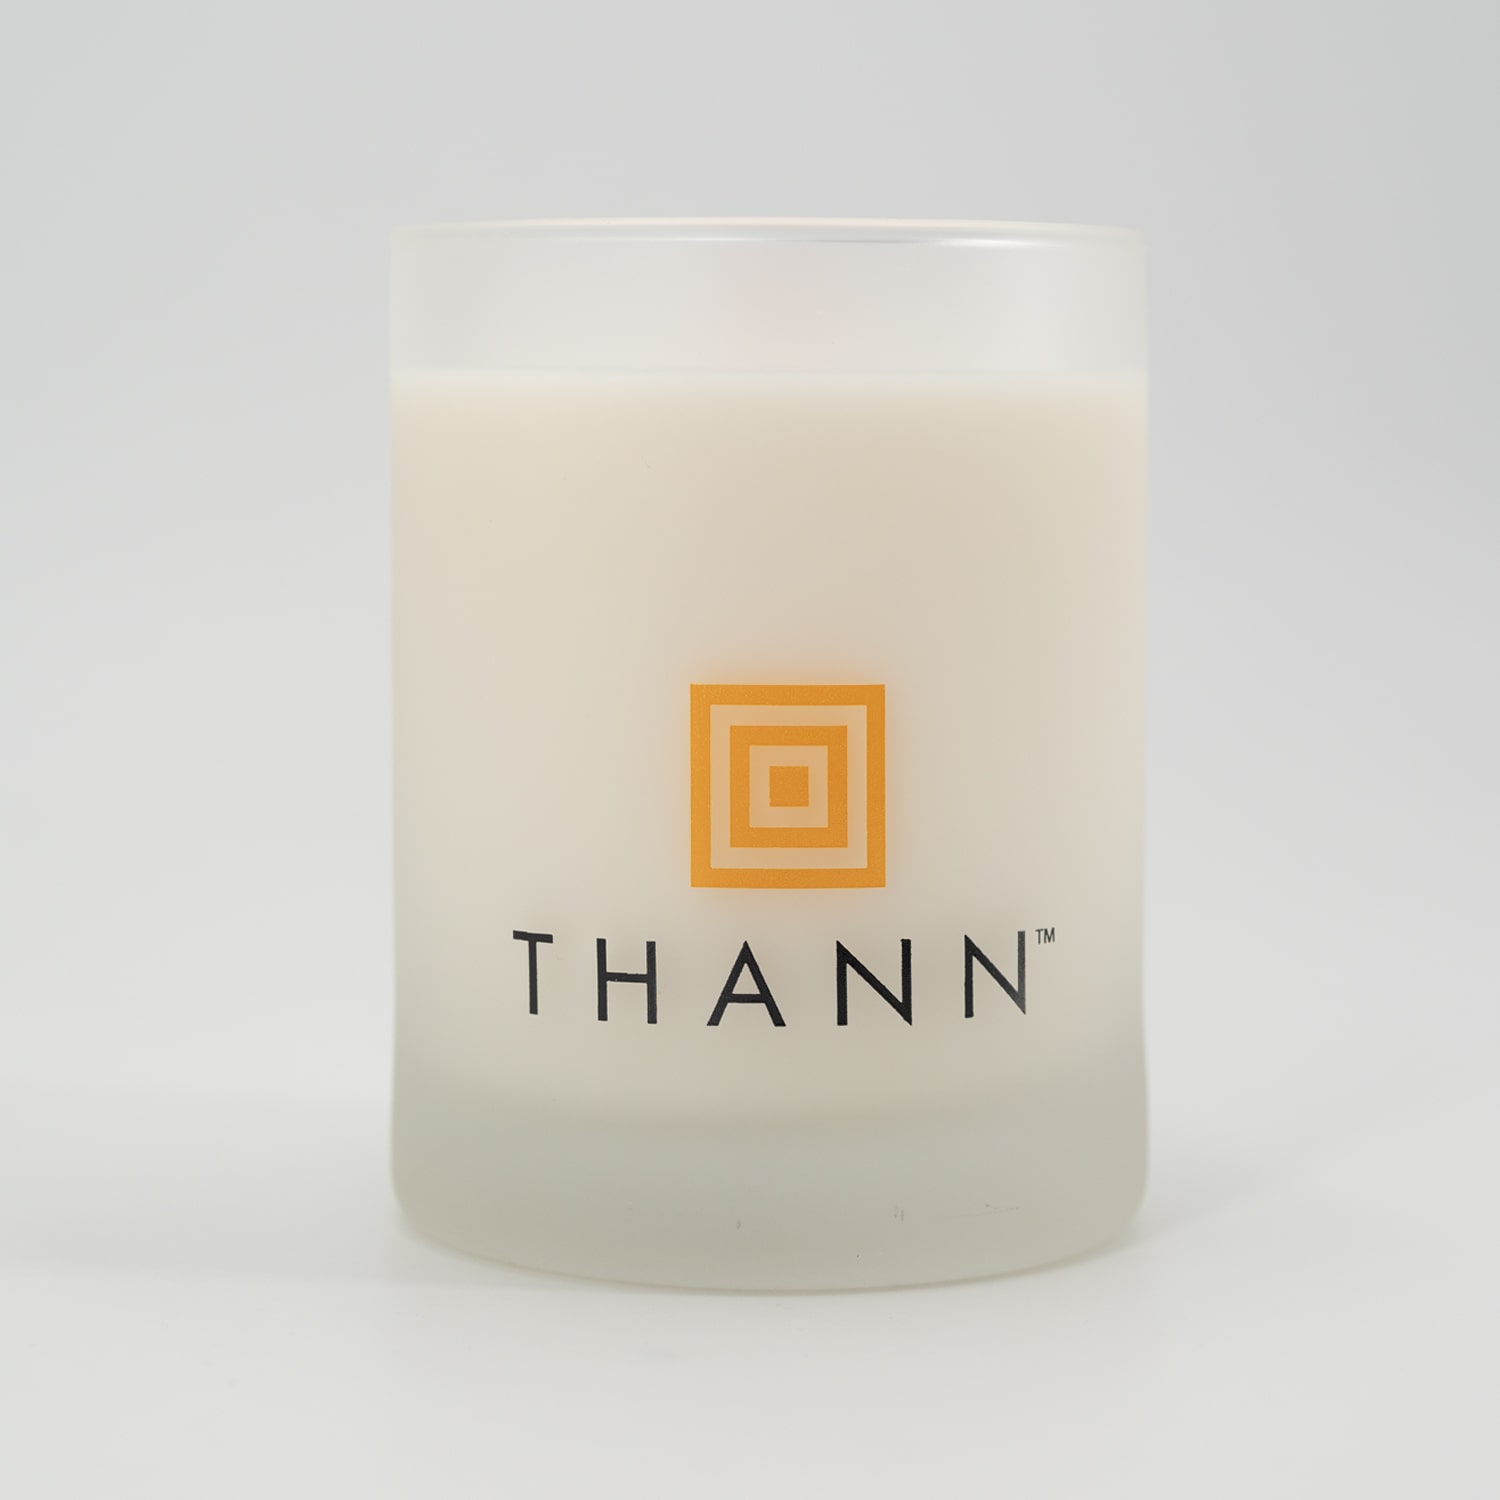 Thann Aroma Therapy Candle - Aromatic Wood